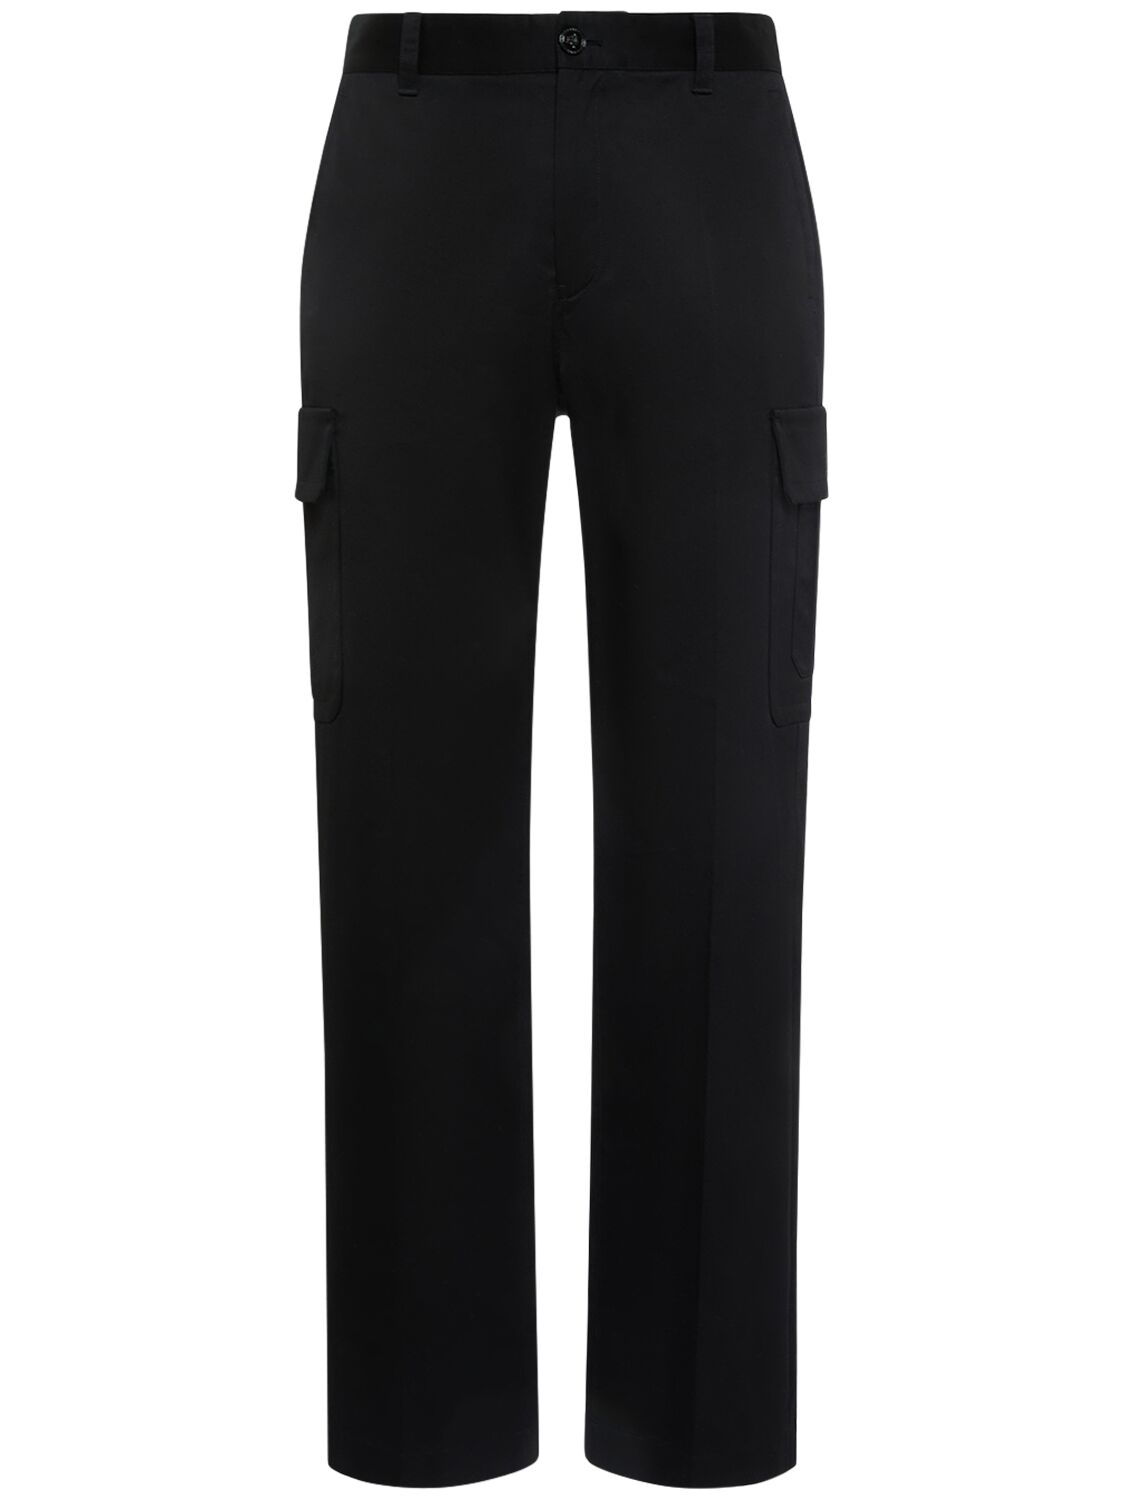 Image of Tailored Wool Twill Formal Pants